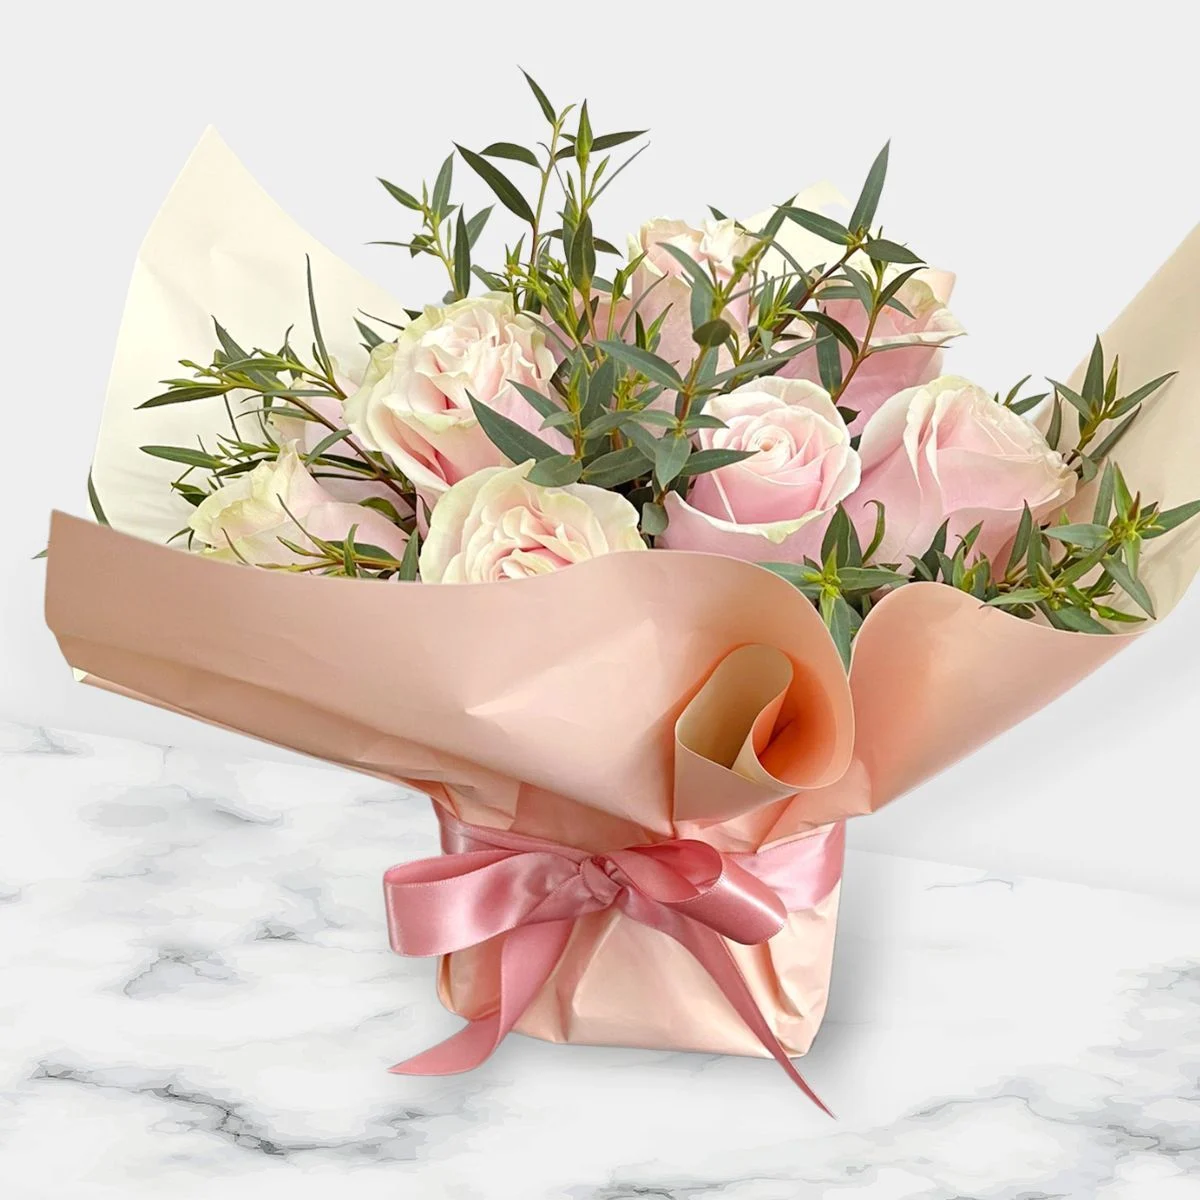 Blooming Gift: Make Someone’s Day with a Flower Subscription in Miami